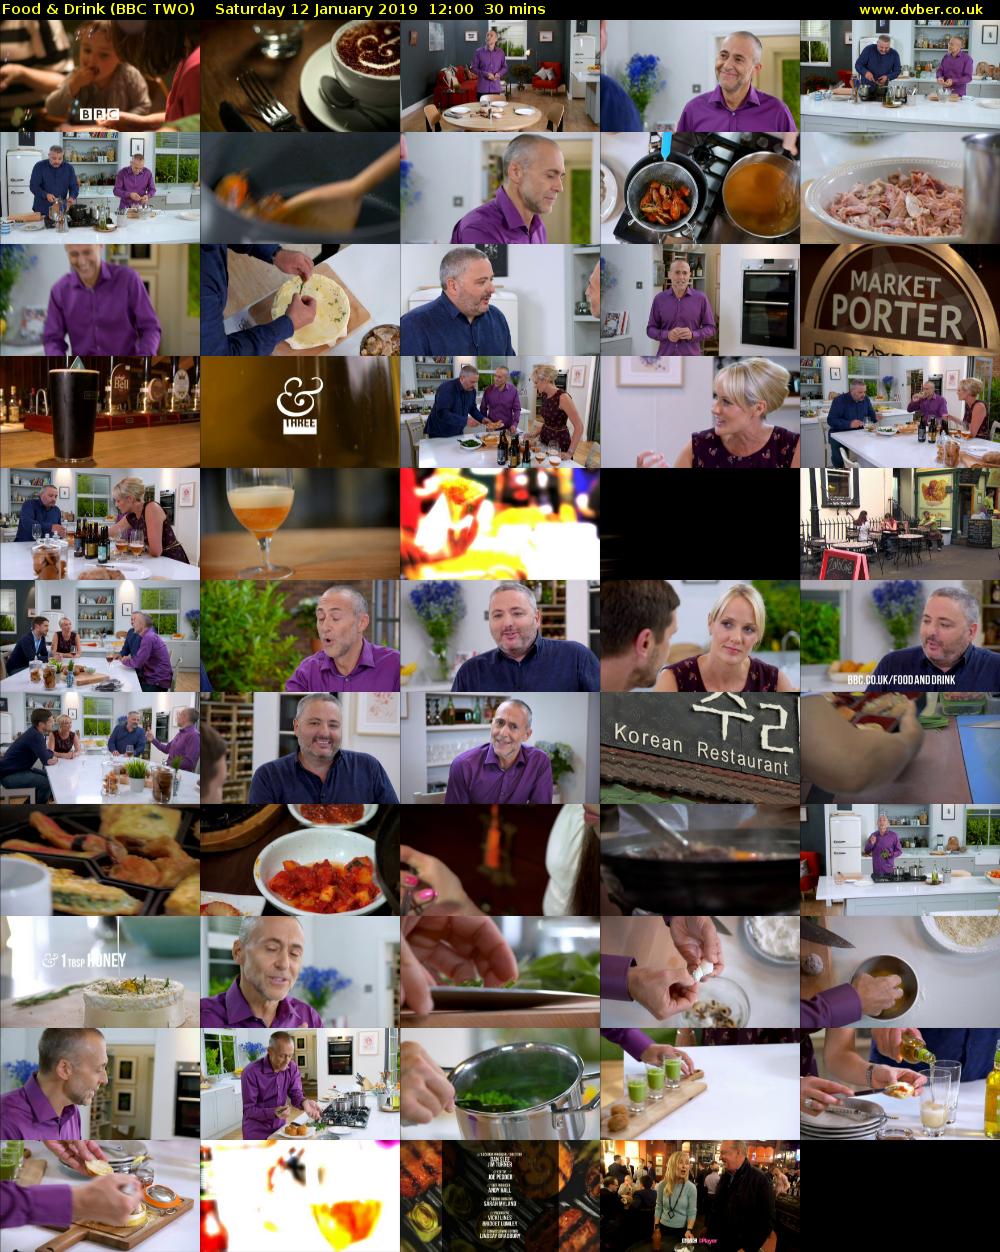 Food & Drink (BBC TWO) Saturday 12 January 2019 12:00 - 12:30